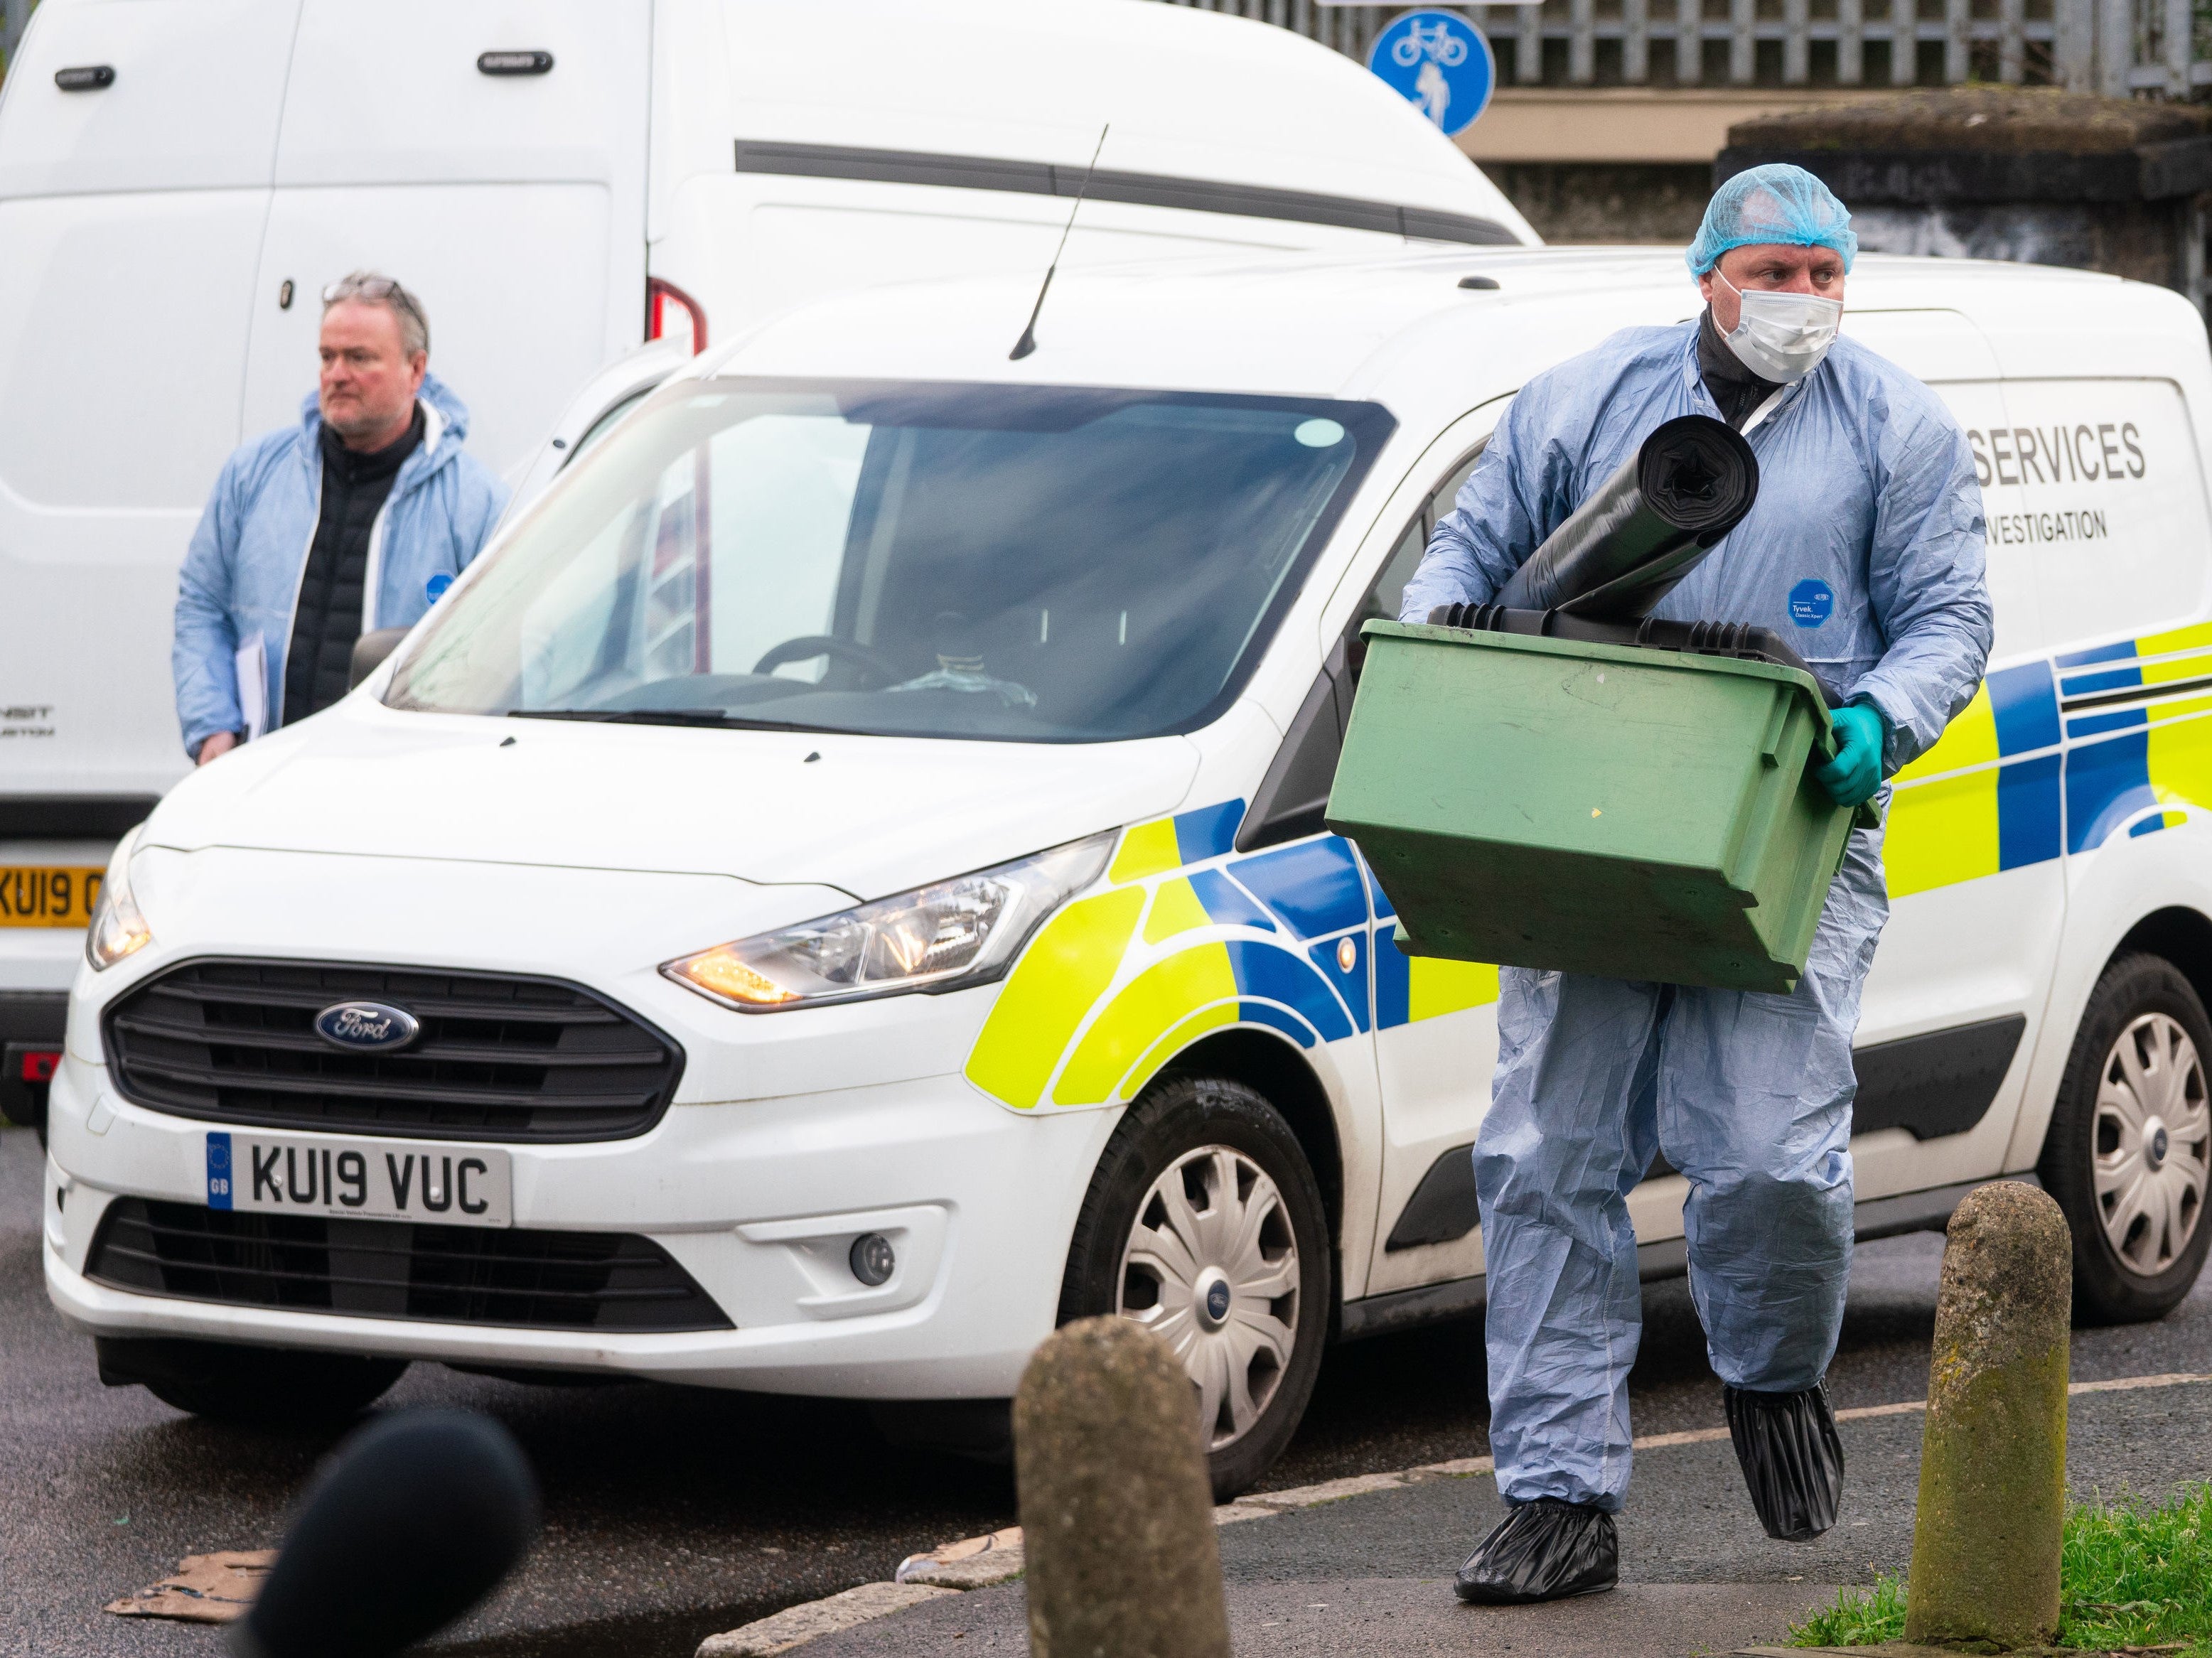 Police forensics officers at the scene of a fatal stabbing at flats on Wisbeach Road, in Croydon, London.